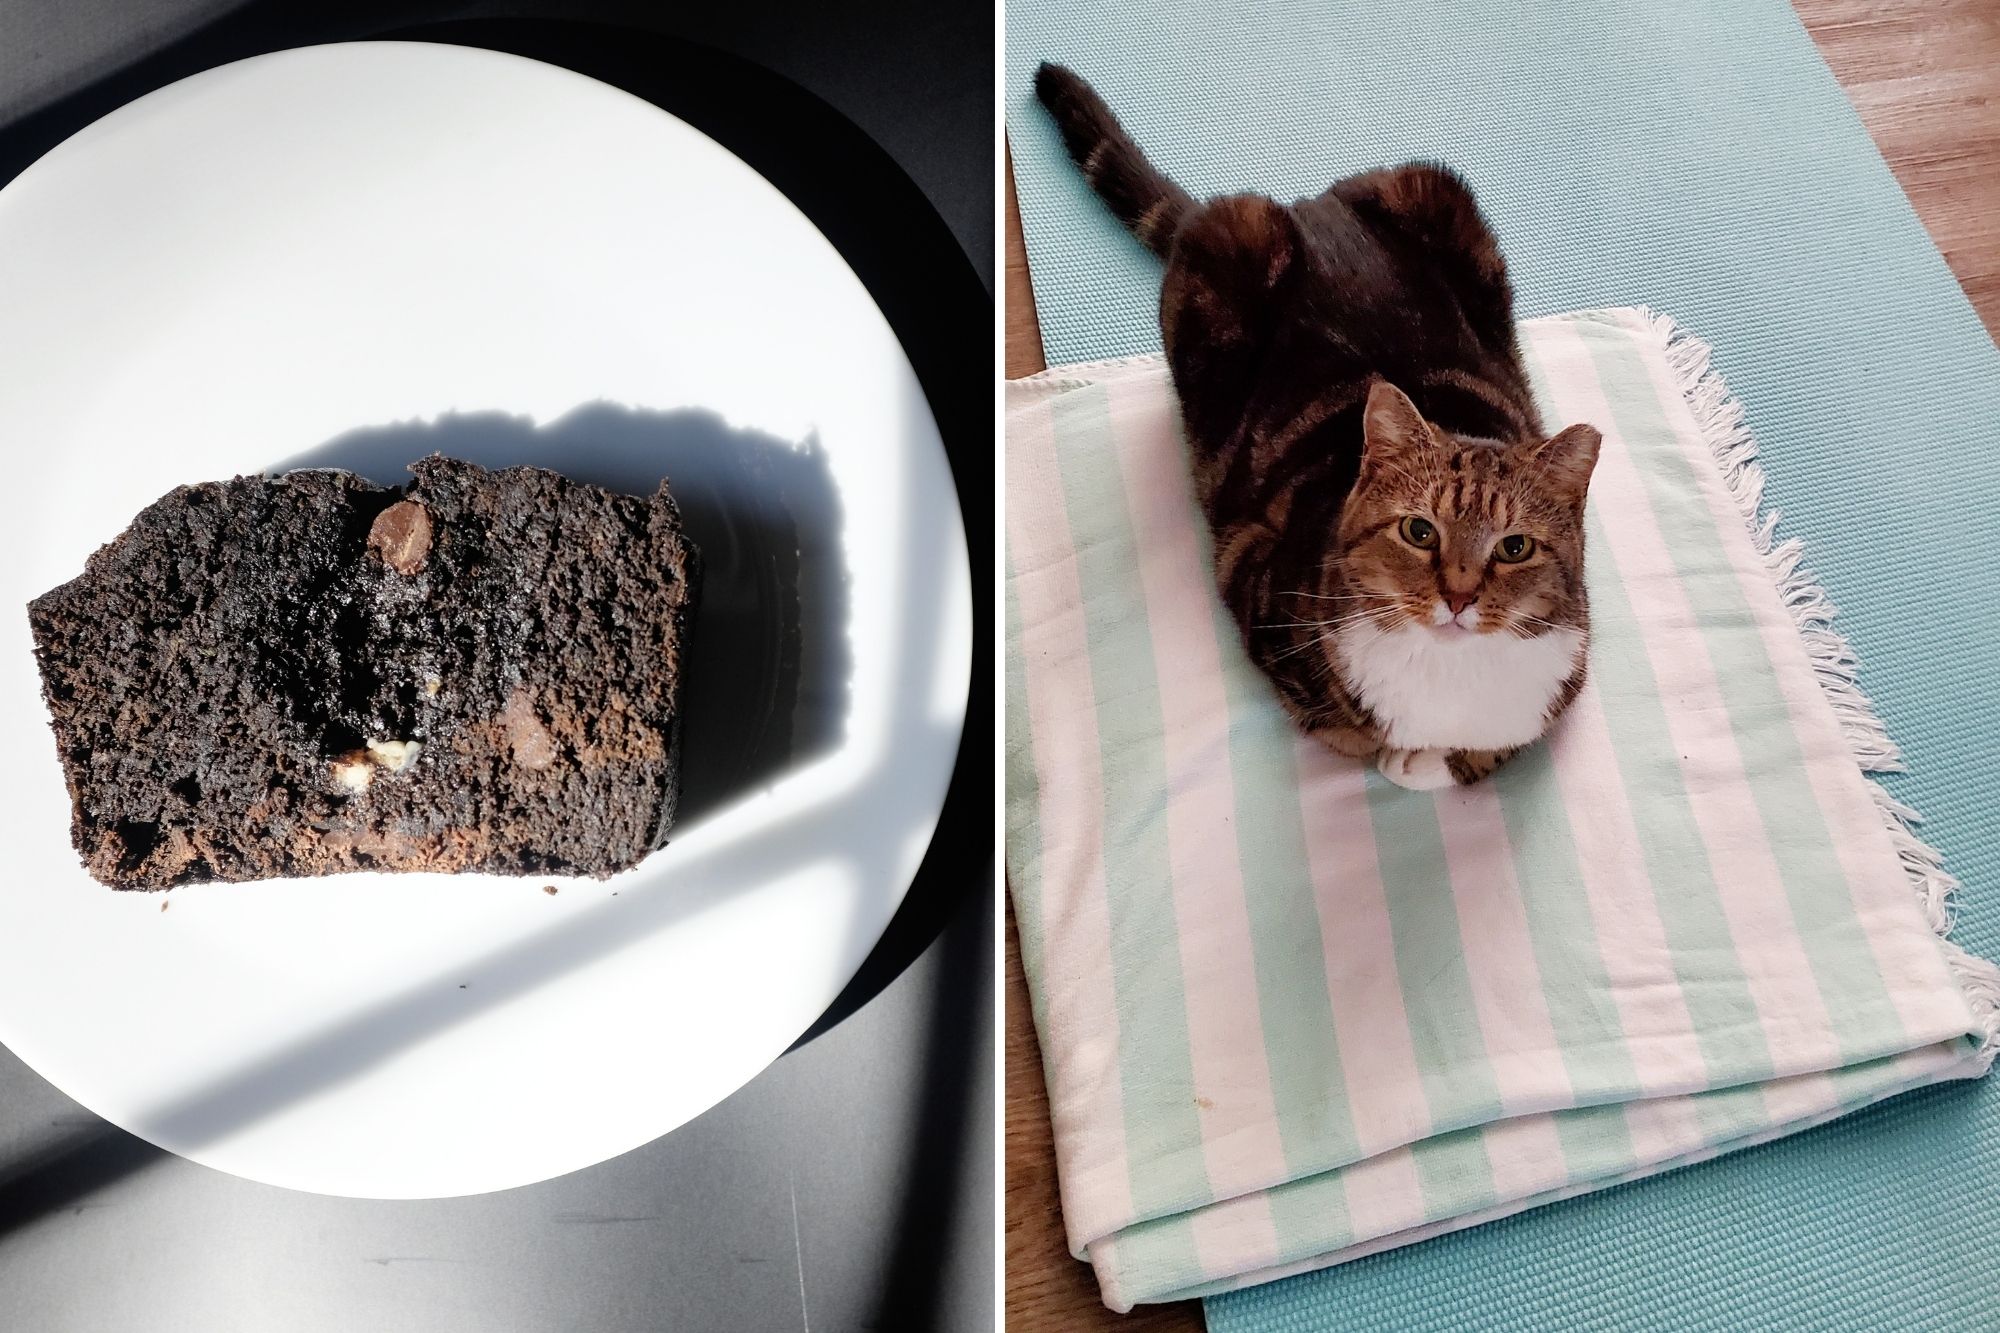 Grid of two images: on the left is a slice of chocolate zucchini bread on a white plate; on the right is the cutest cat ever sitting on a towel on top of a yoga mat. She is looking at the camera with her paws crossed.